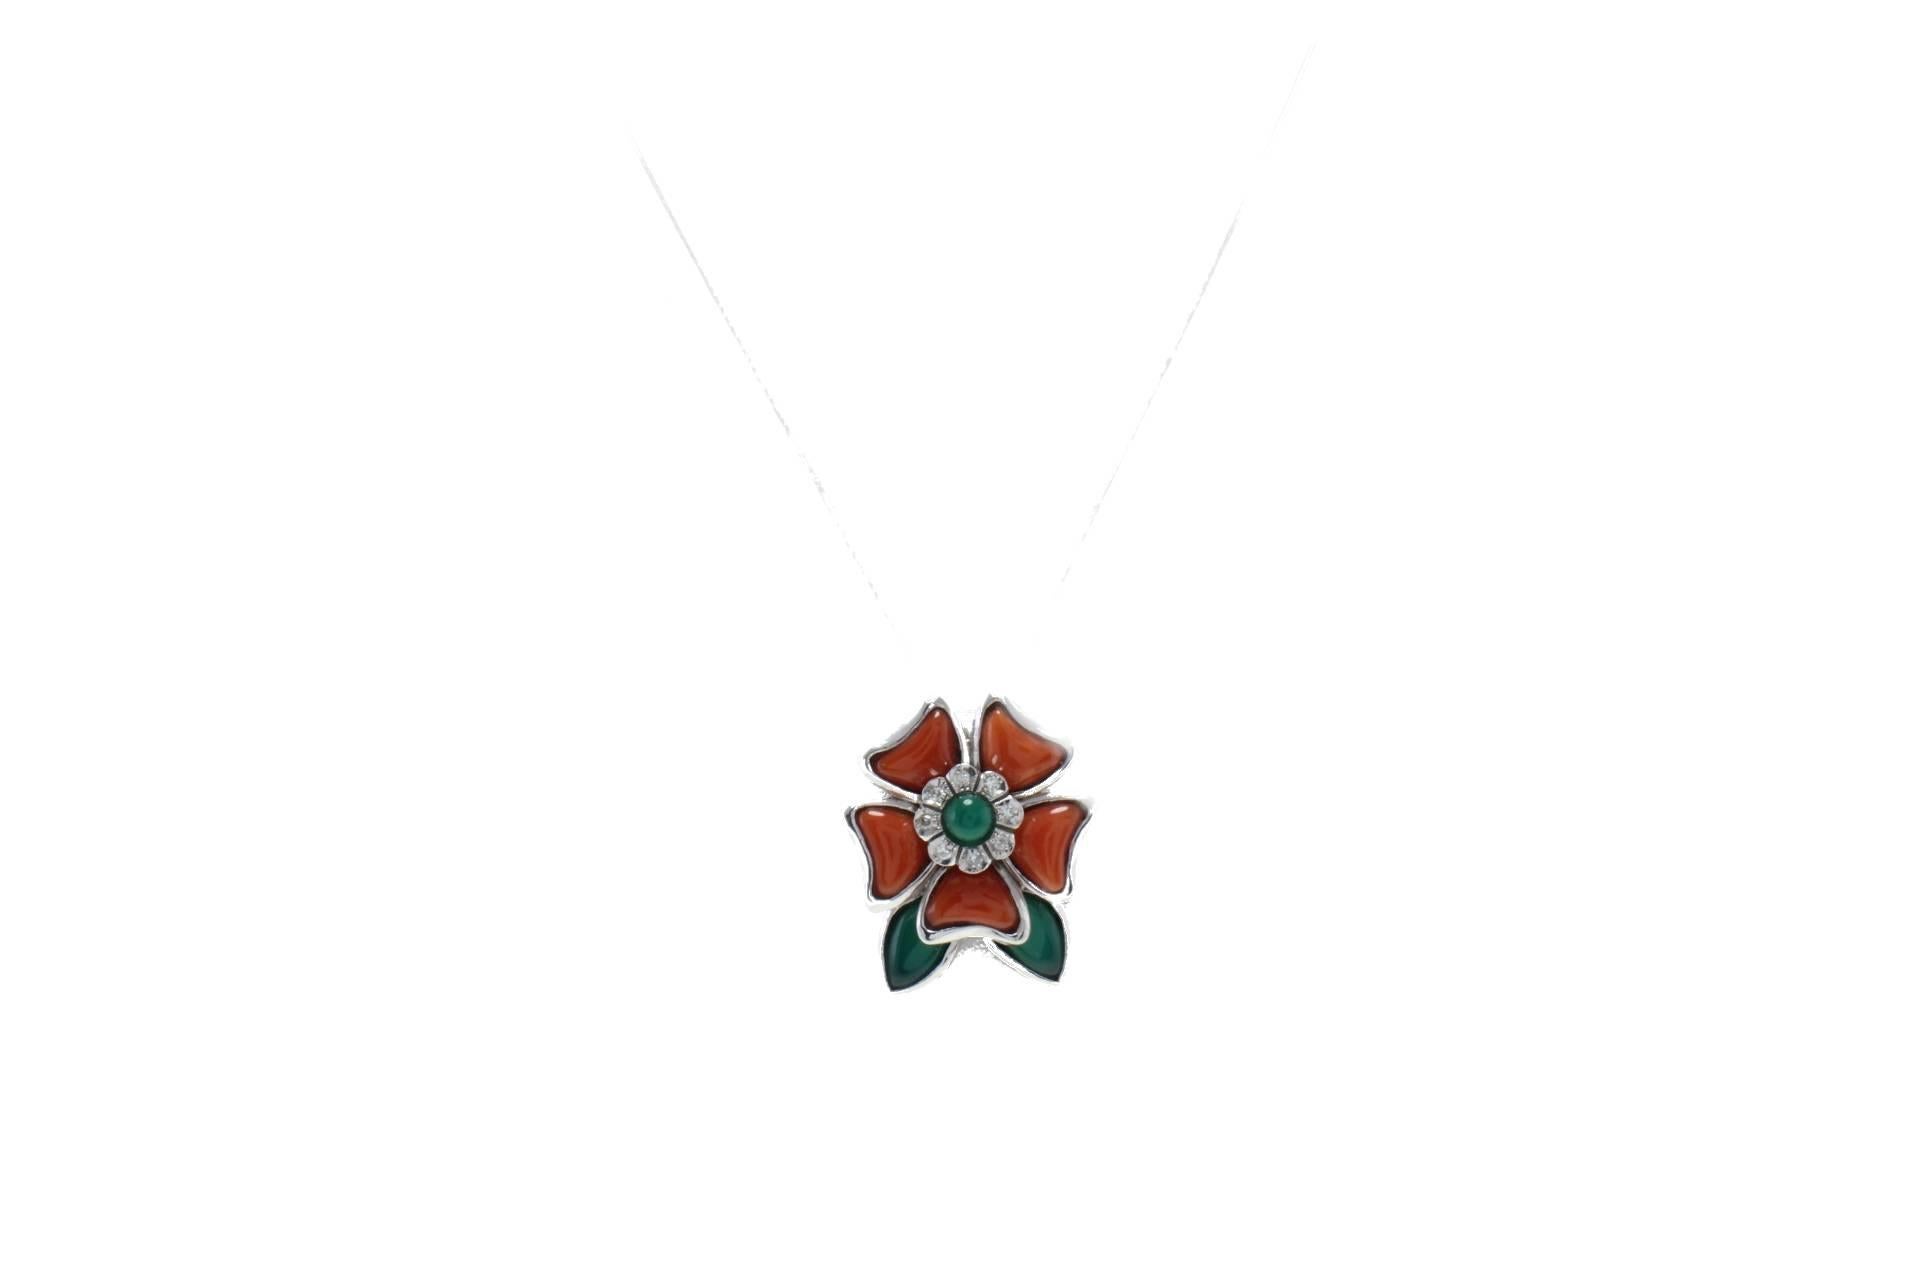 Flower shaped pendant necklace in 14k white gold mounted with diamonds green agate and coral.
Diamonds 0.15 kt
Green Agate 0.57 gr
Coral 1.20 gr
Tot.Weight 10.90 gr
R.F guhf